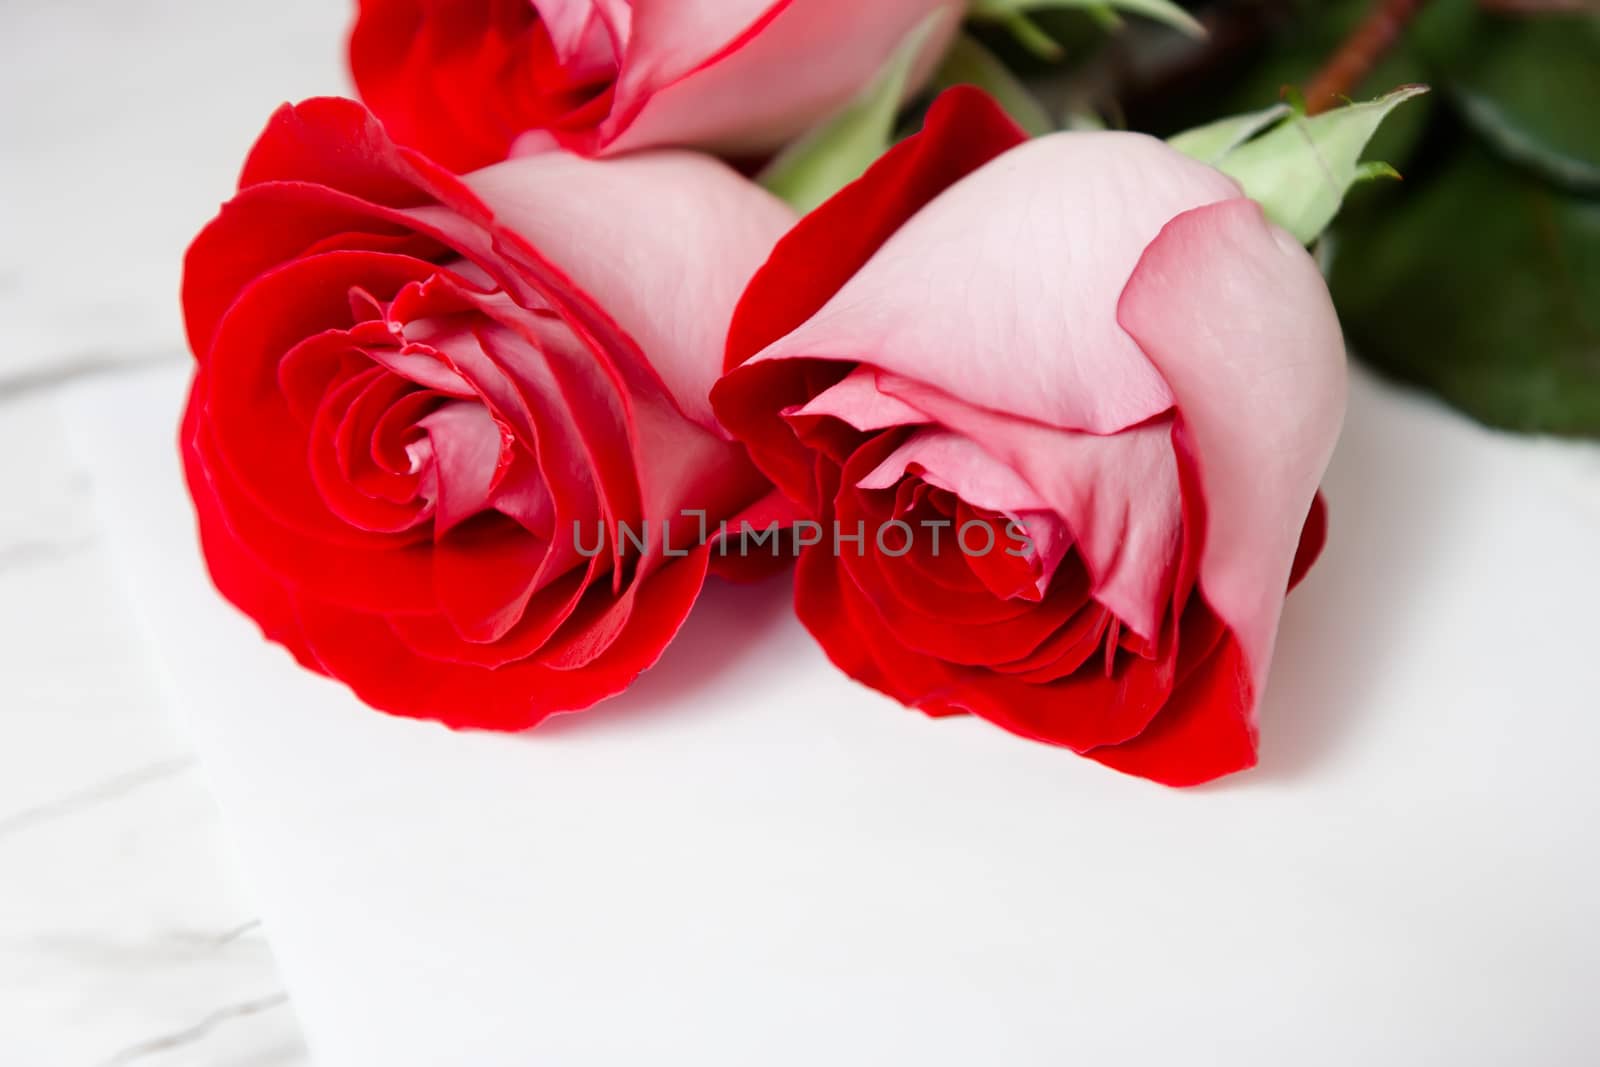 red roses and a blank sheet of paper by pzRomashka